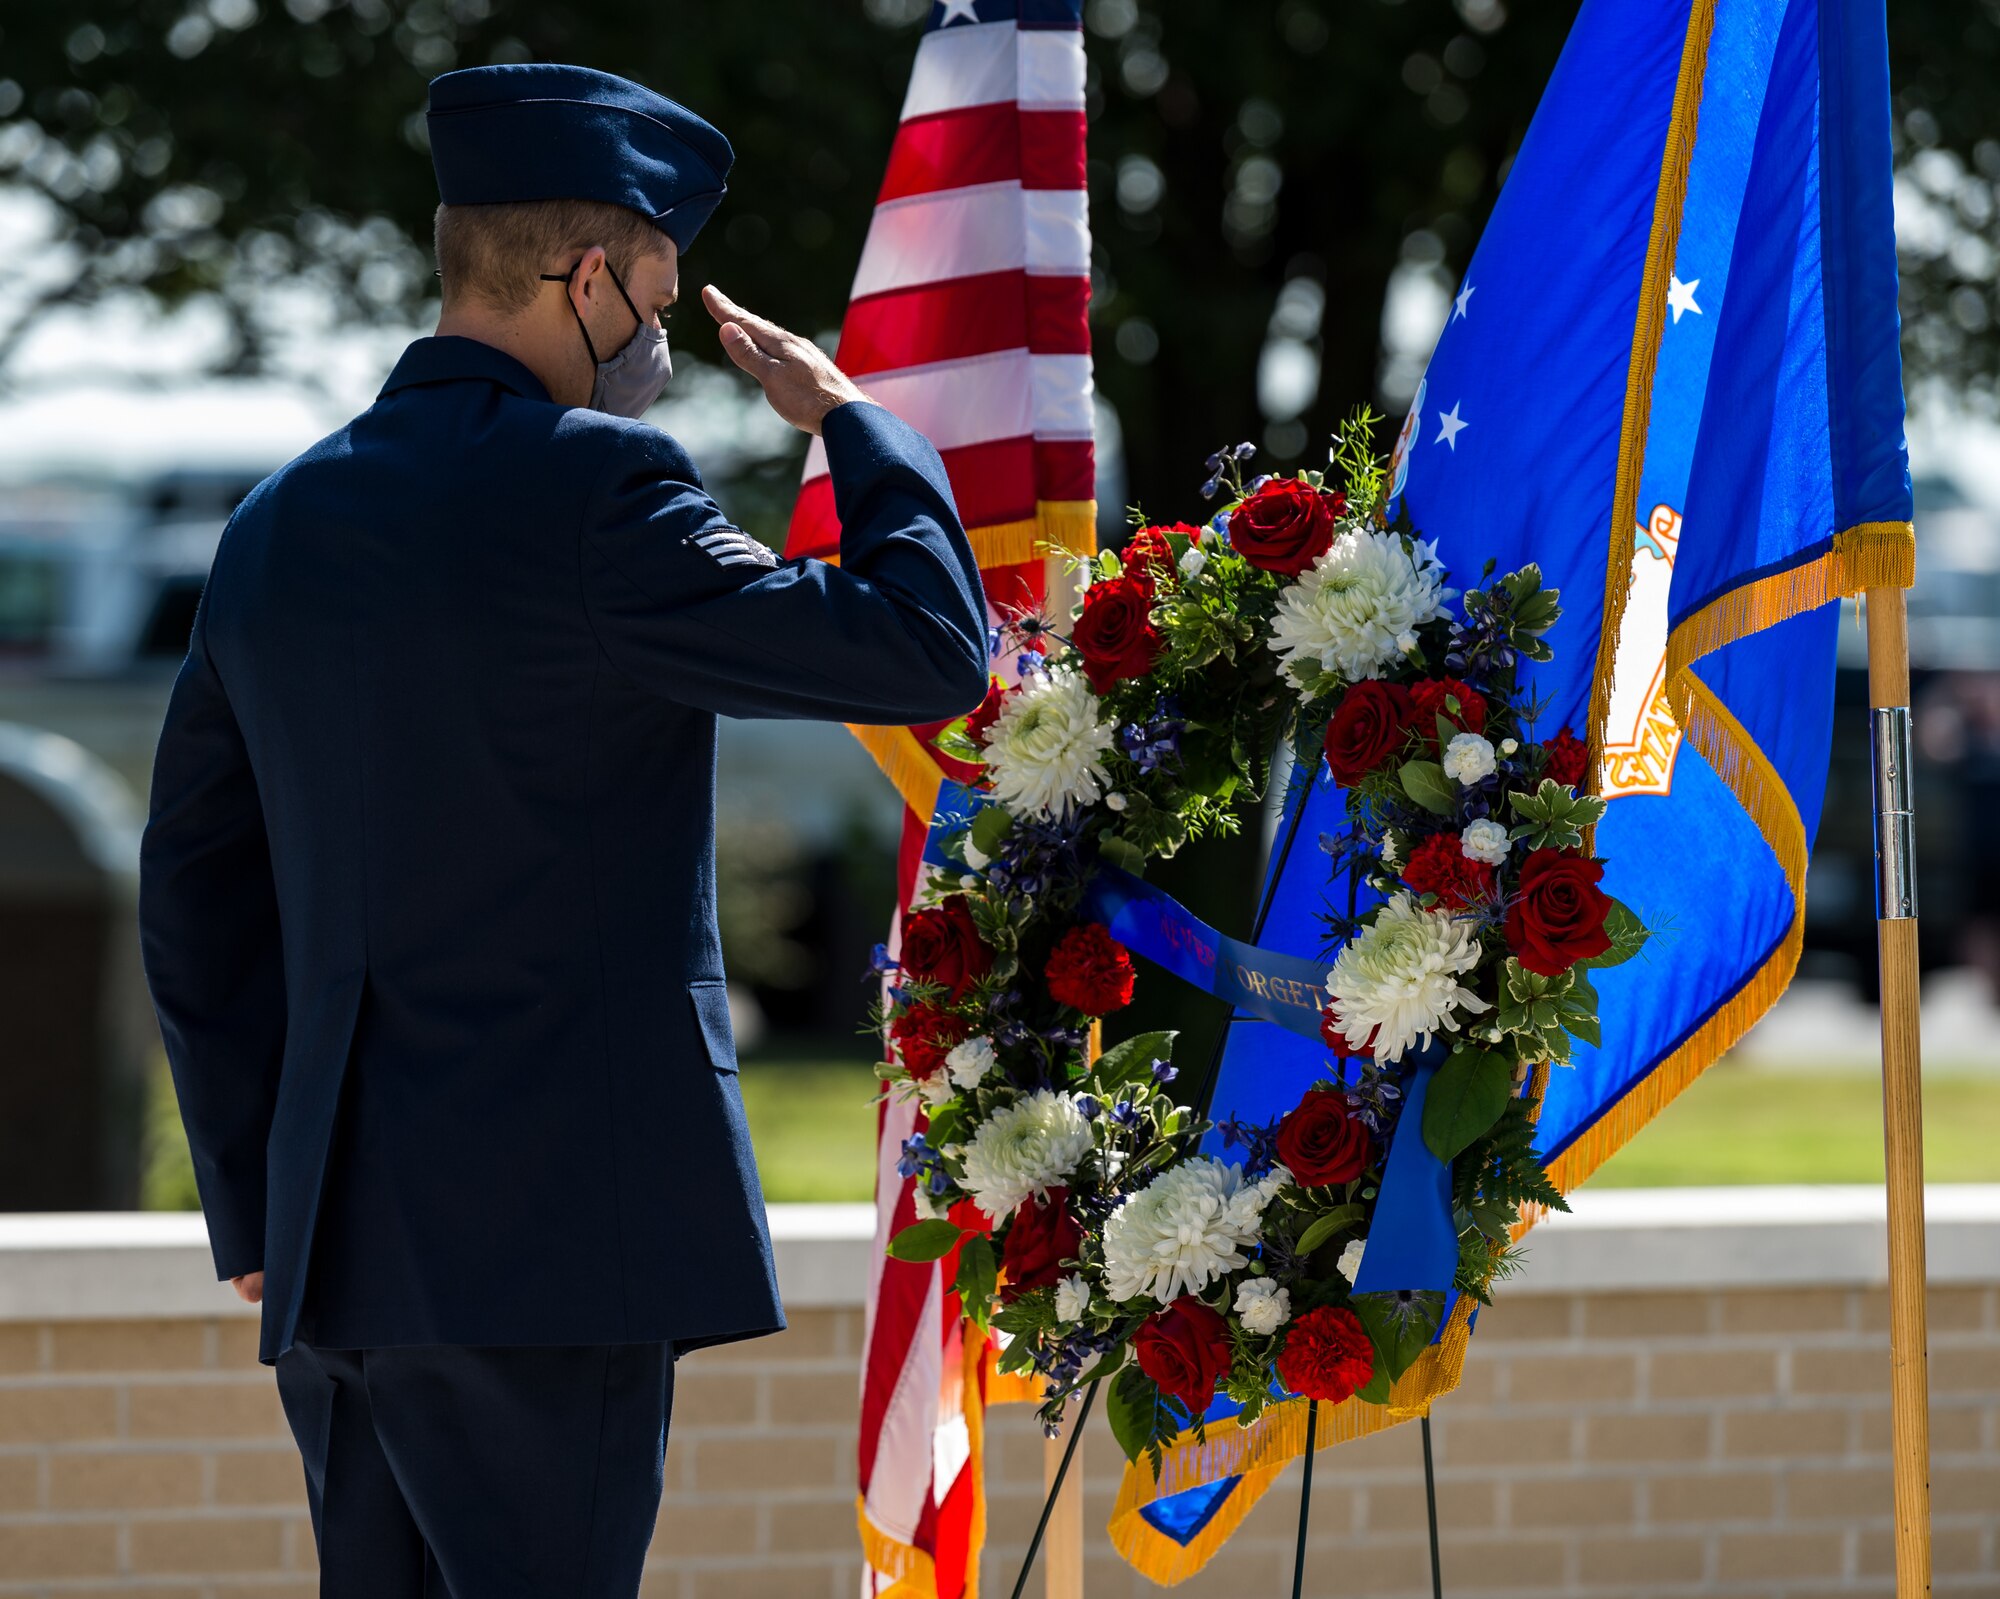 Senior Airman Kyle Spence, 436th Civil Engineer Squadron fire department operator, renders a salute during the 20th Anniversary 9/11  Remembrance Ceremony held at the Air Mobility Command Museum’s 9/11 Memorial on Dover Air Force Base, Delaware, Sept. 11, 2021. Spence placed the wreath at the memorial in remembrance for all those who died in the terrorist attacks on the World Trade Center in New York Sept. 11, 2001. (U.S. Air Force photo by Roland Balik)